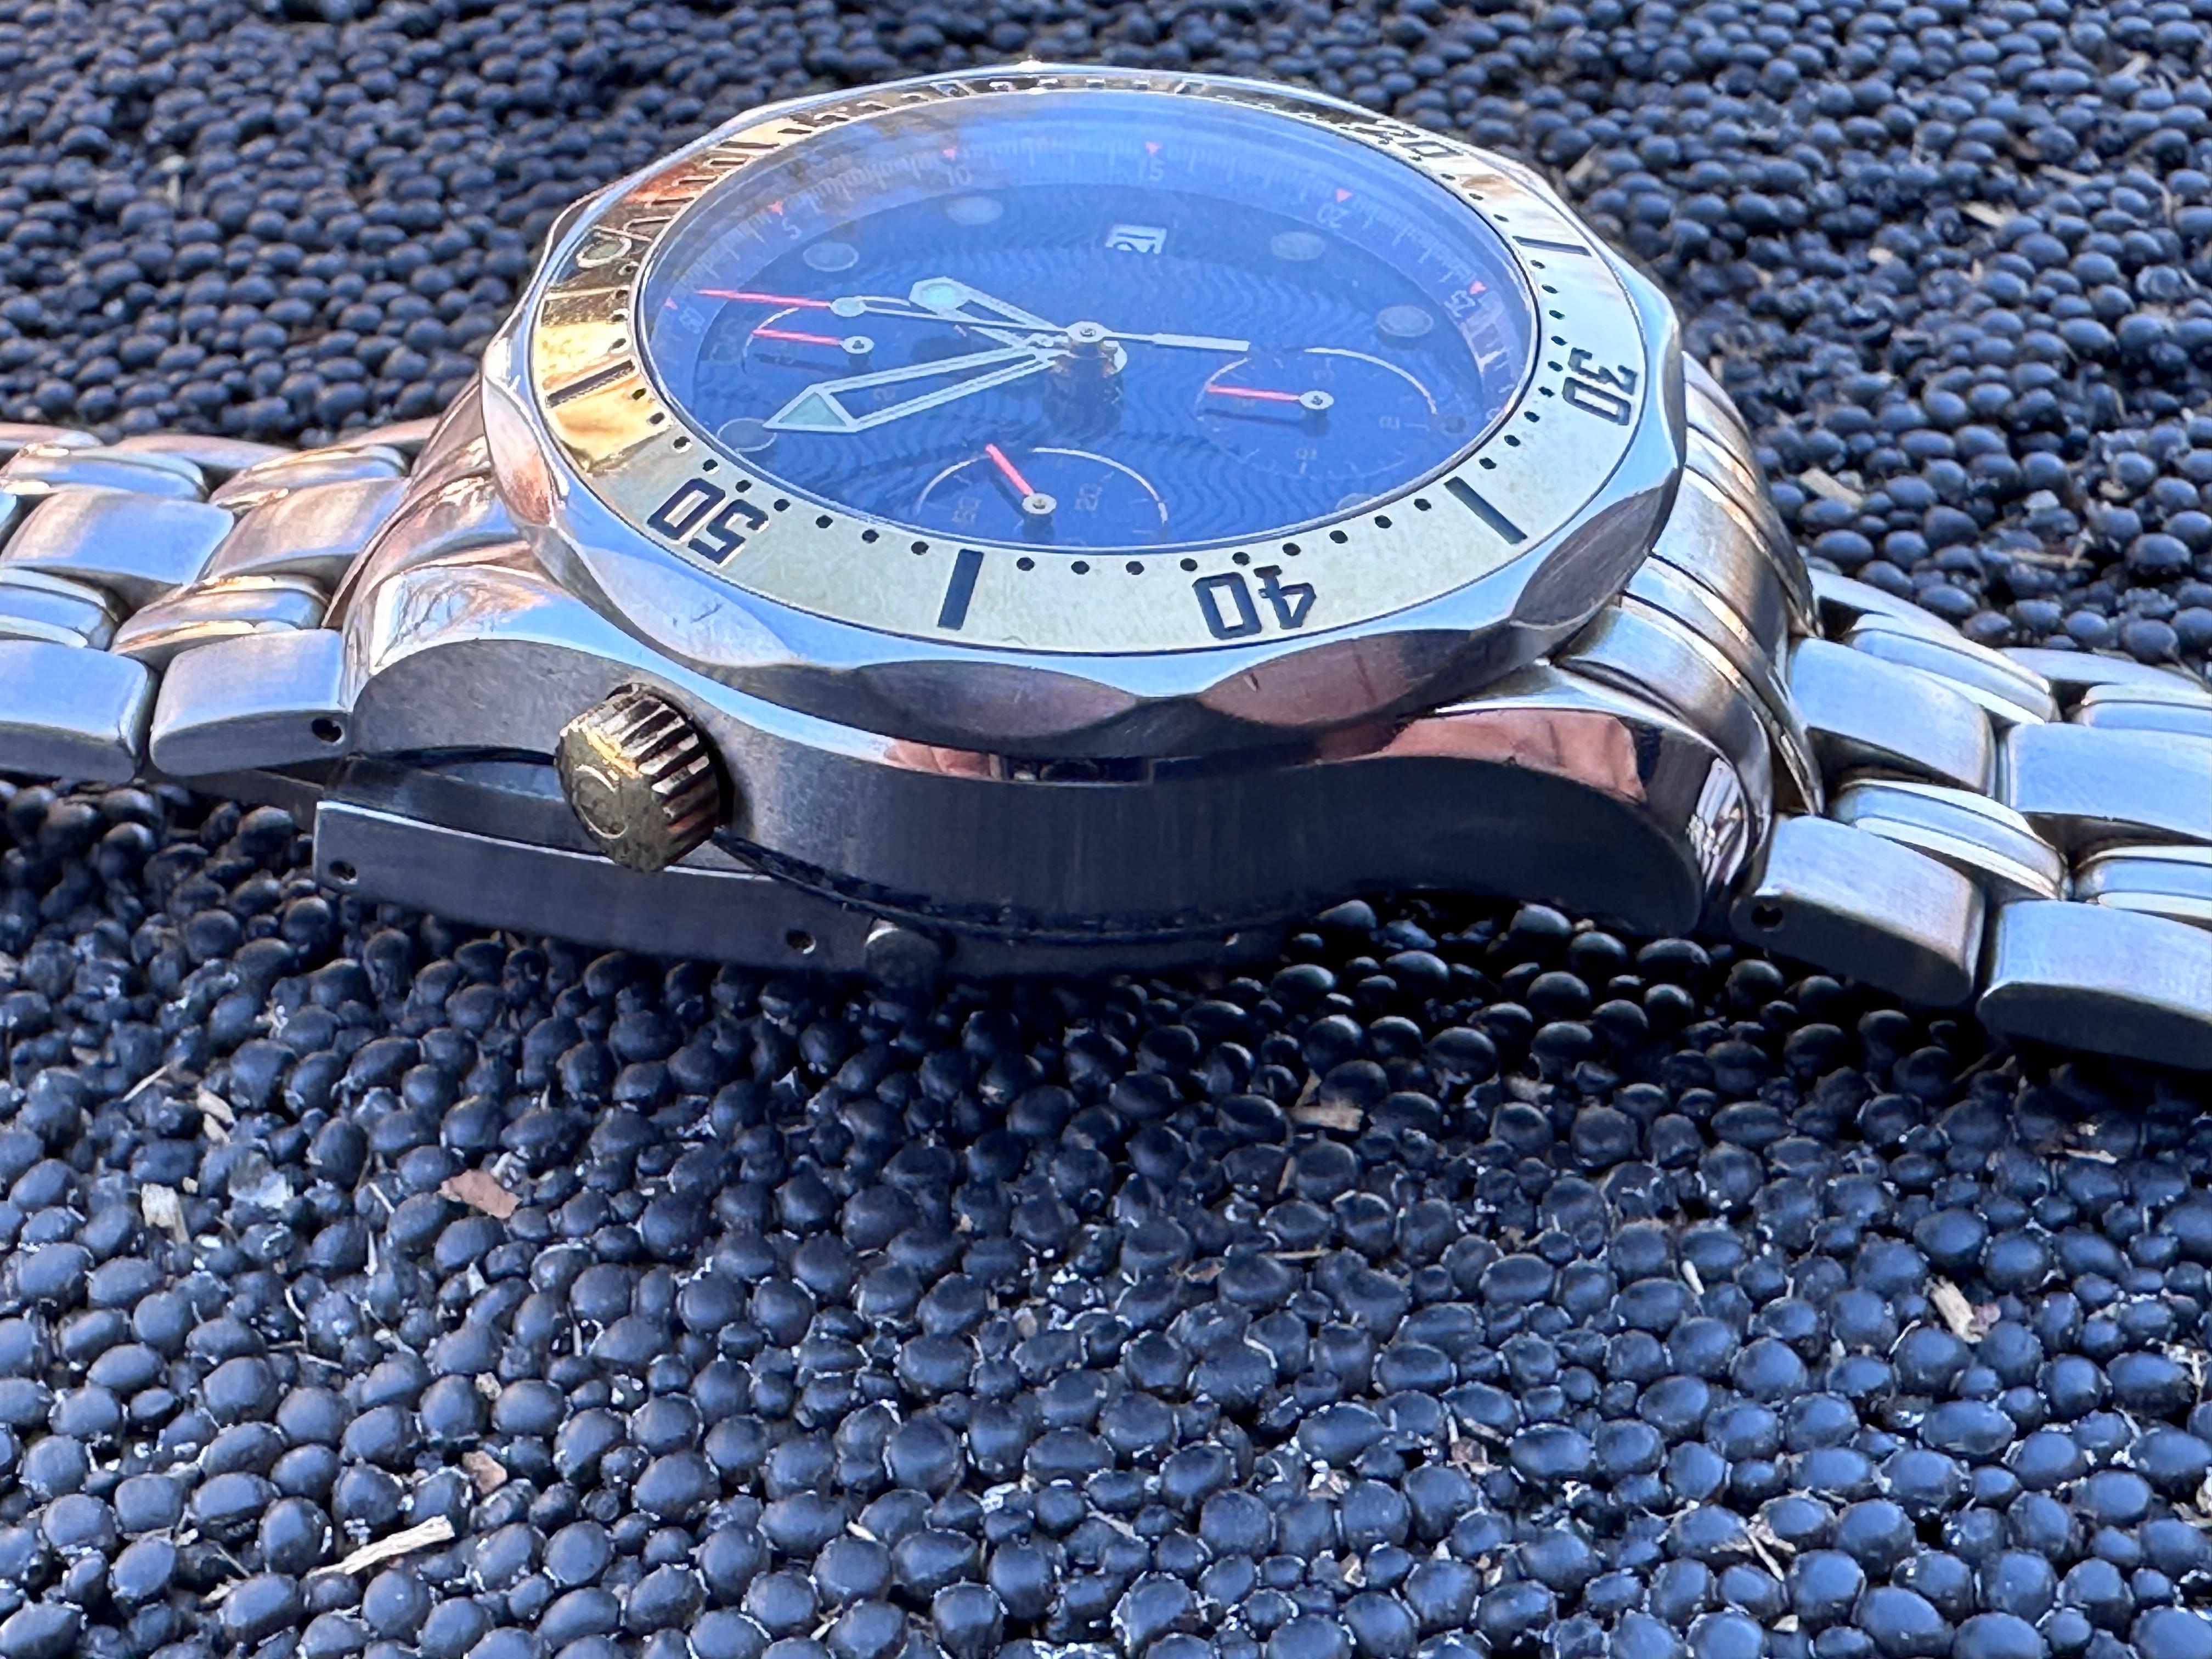 Omega Seamaster Diver 300 M 2398.80 Chronograph 18K Gold/ Stainless steel Watch For Sale 4